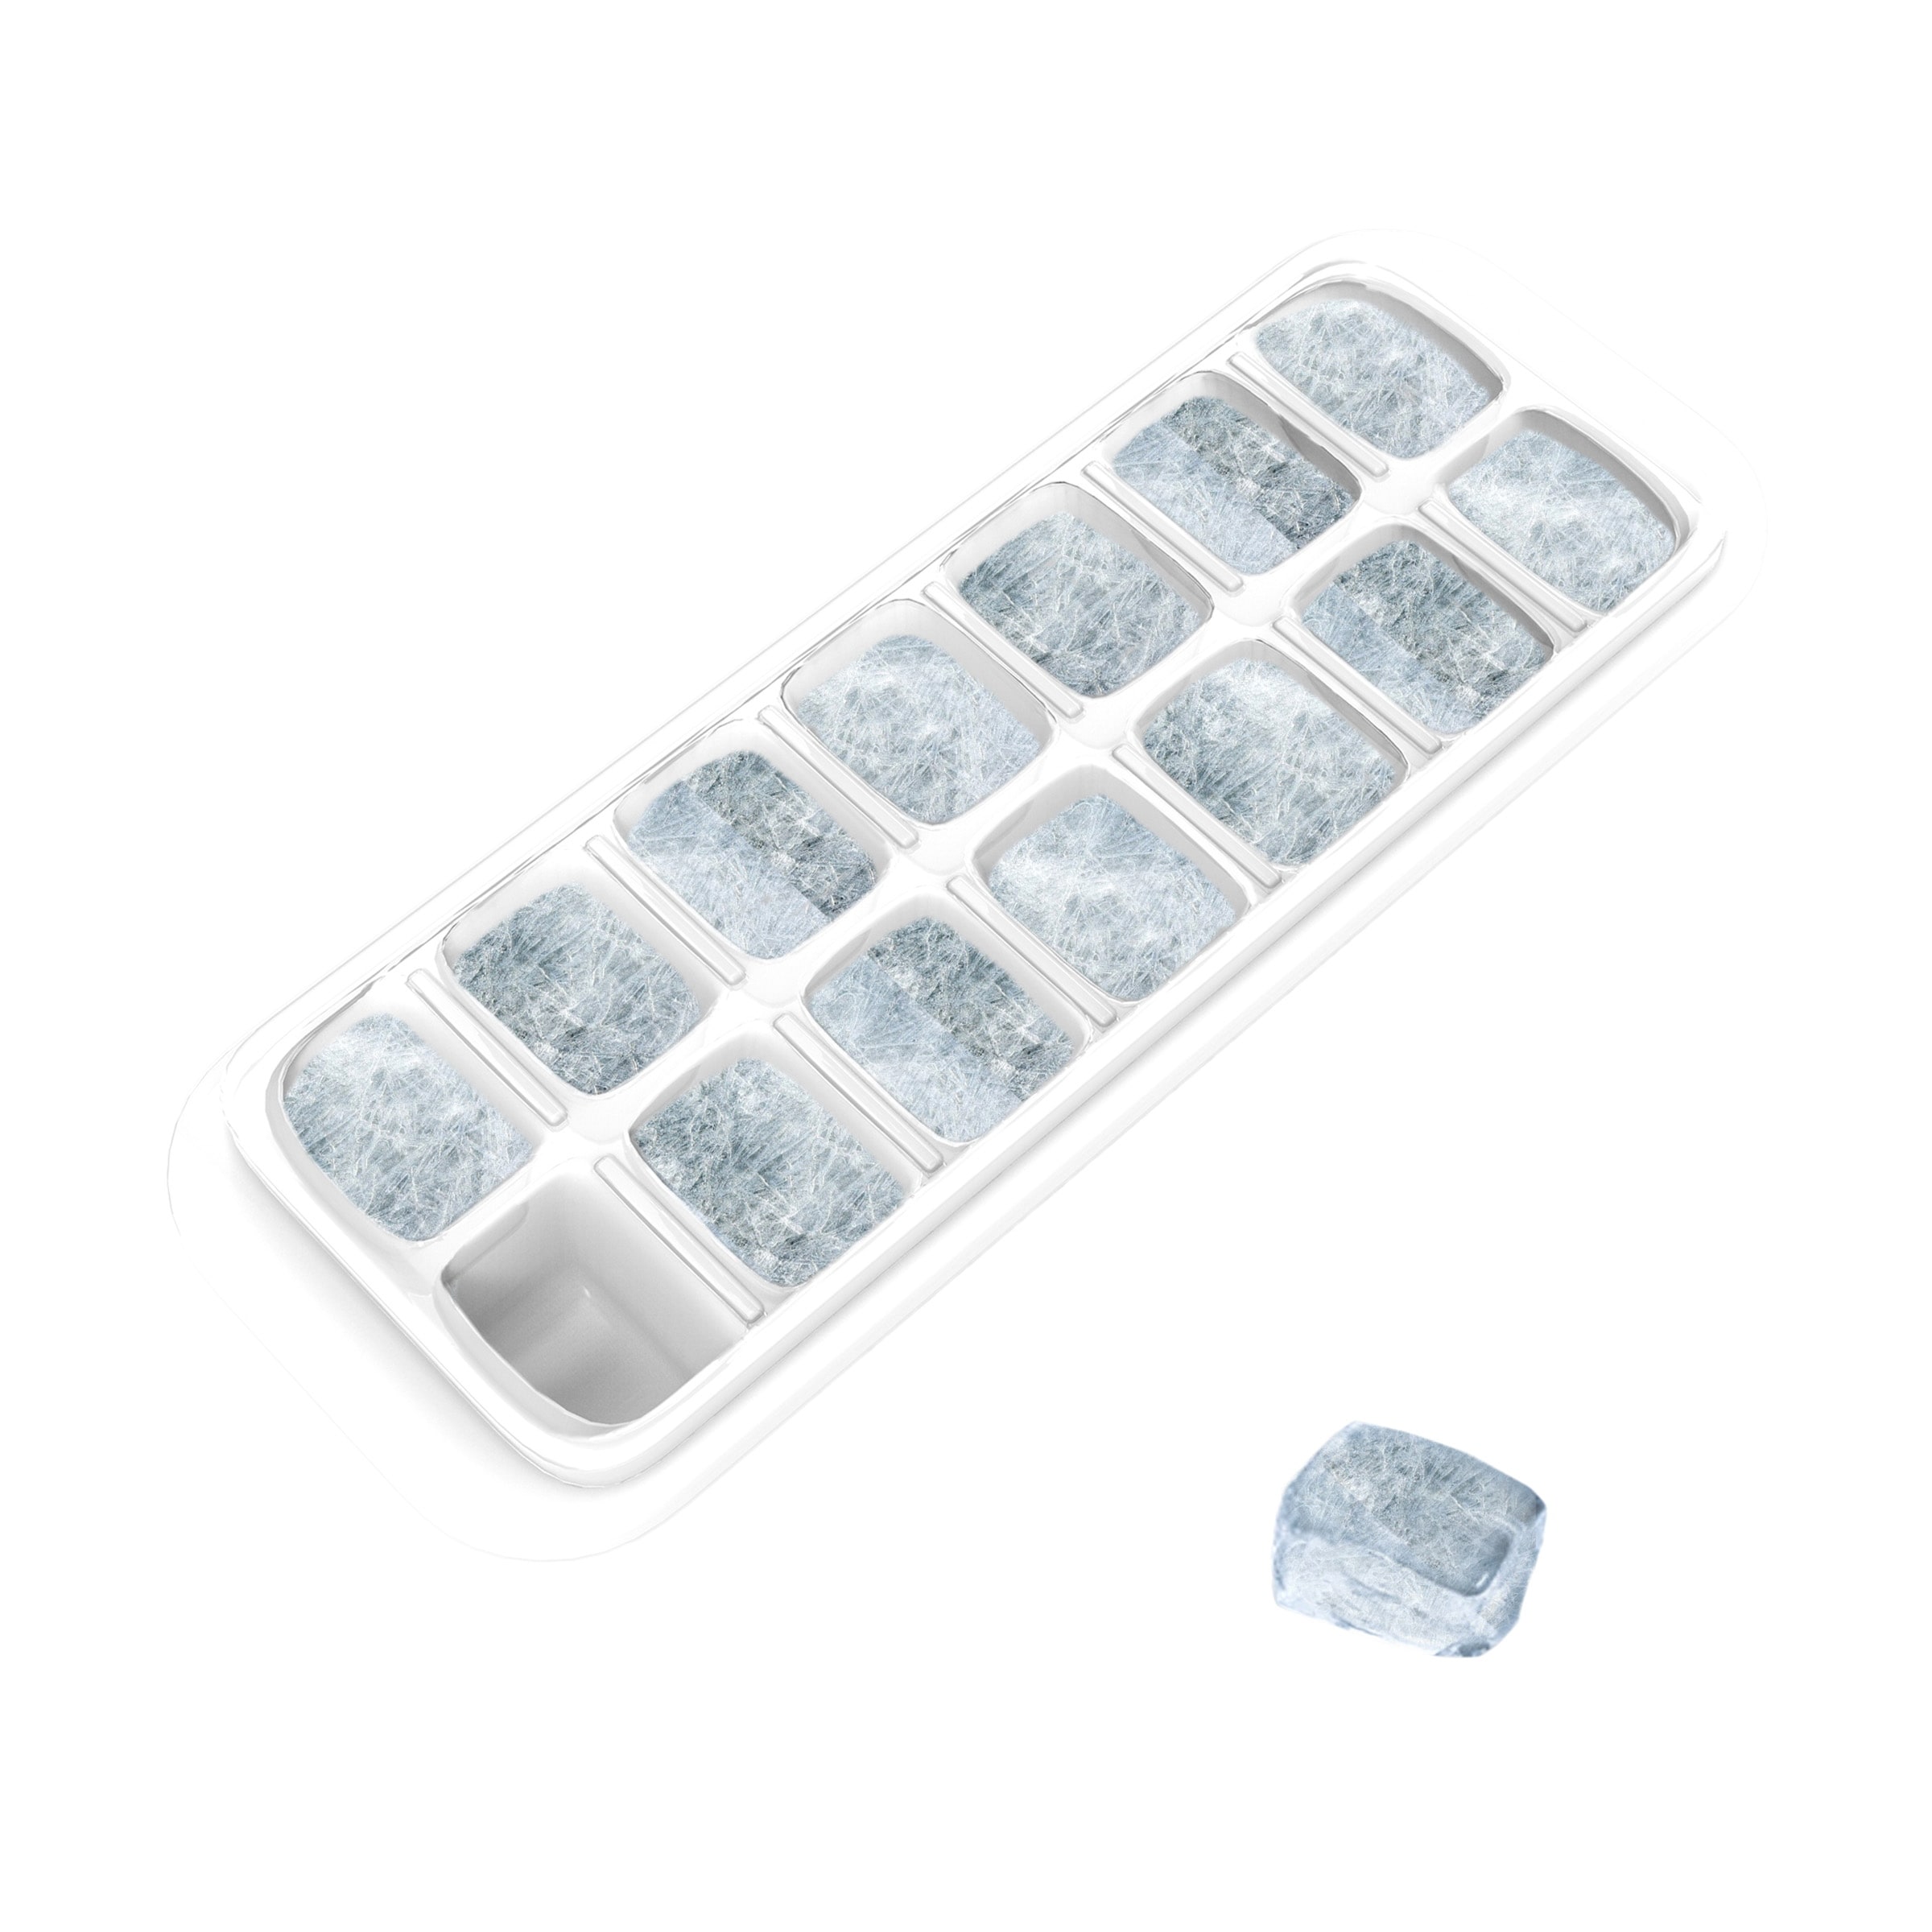 Easy to Fill Covered Ice Cube Trays, Set of 2